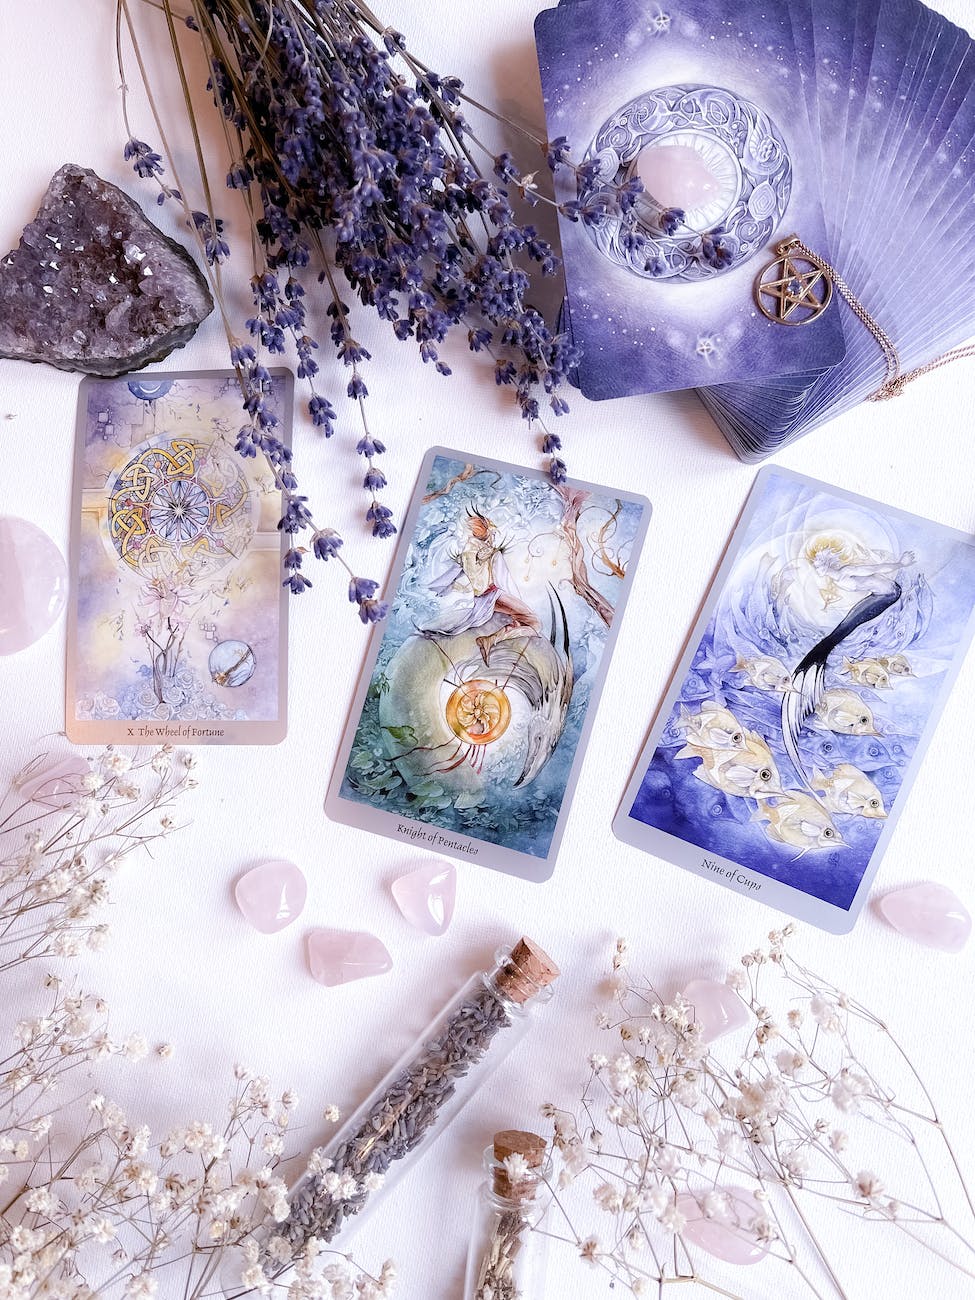 deck of tarot cards beside dried flowers and crystals on a white surface